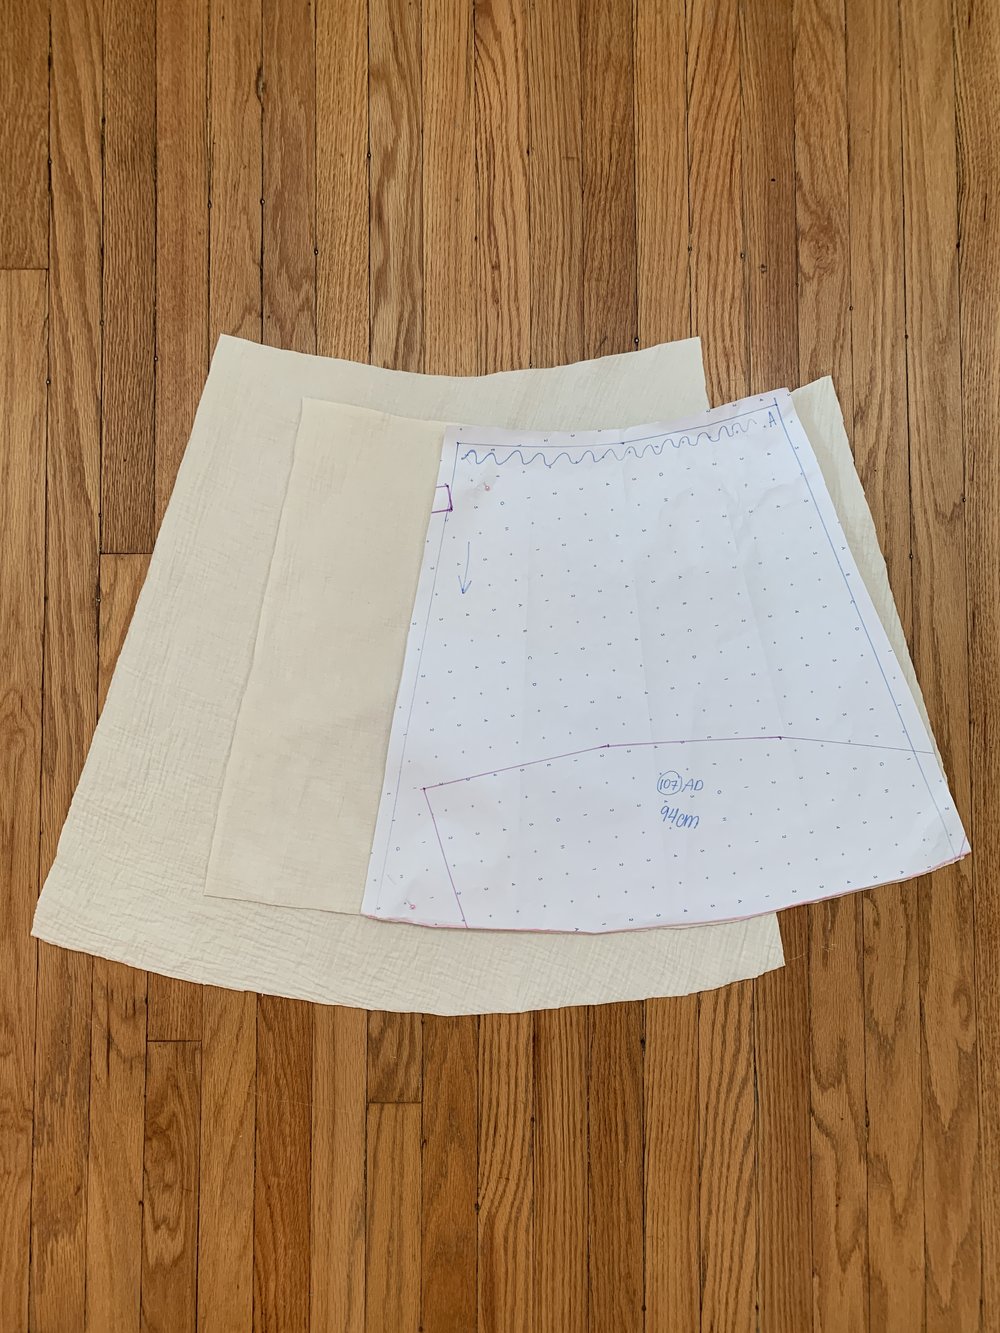 Skirt layers, two lengths.